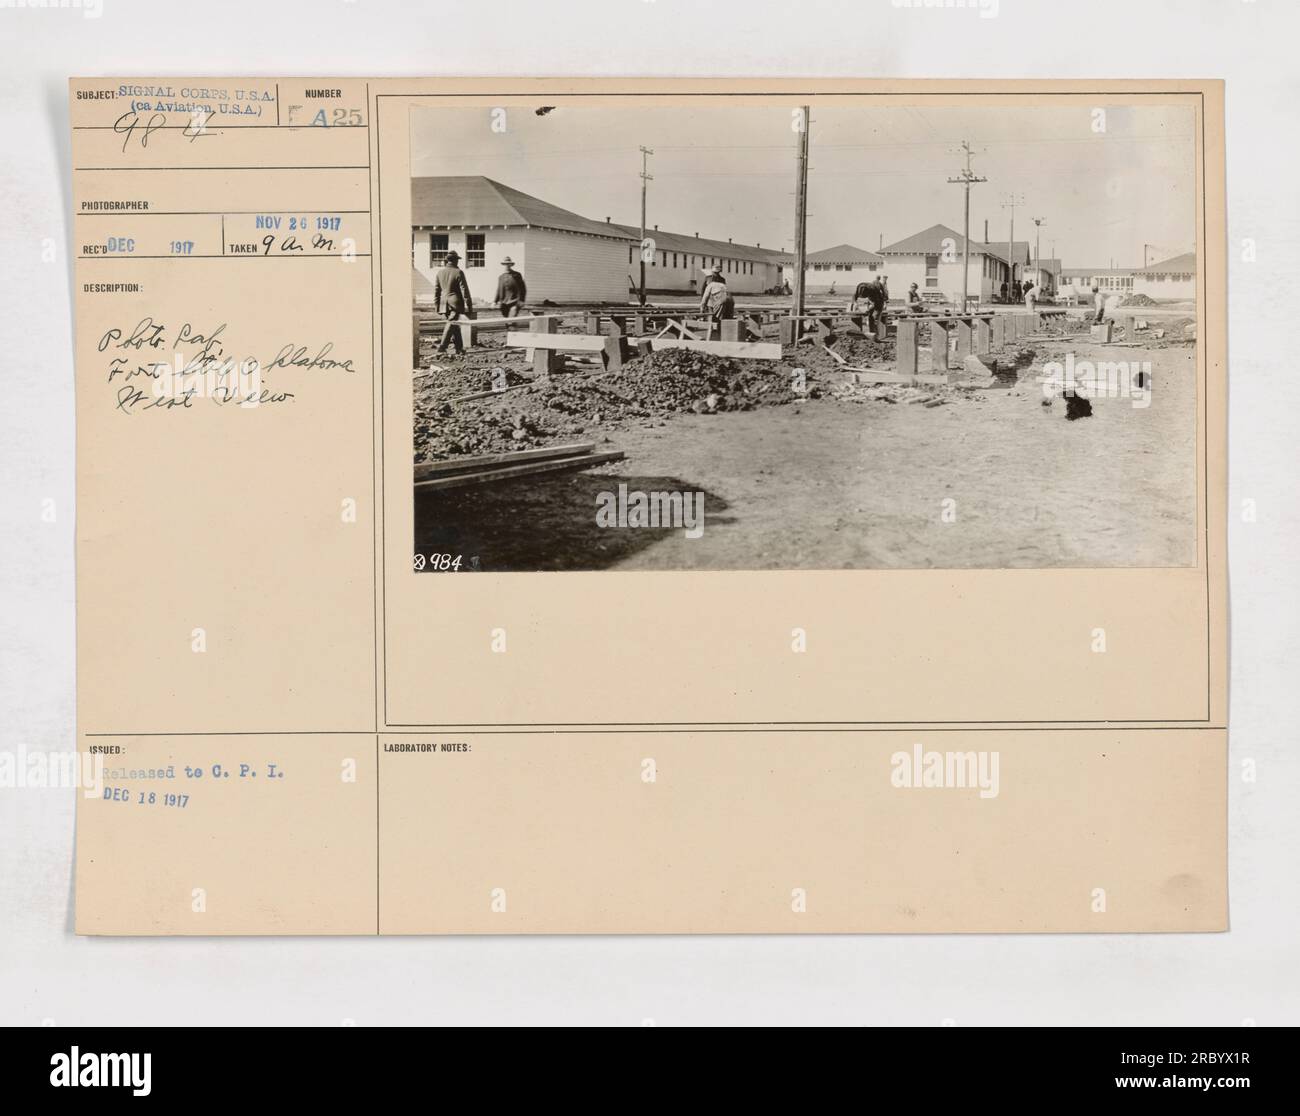 This photograph shows the photo lab at Fort Sill, OK during World War One. The west view of the lab is depicted. The image is dated November 26, 1917 and was taken at 9am. The photograph was taken by RICODEC 1917. It was issued and released to C. P. I. on December 18, 1917. Stock Photo